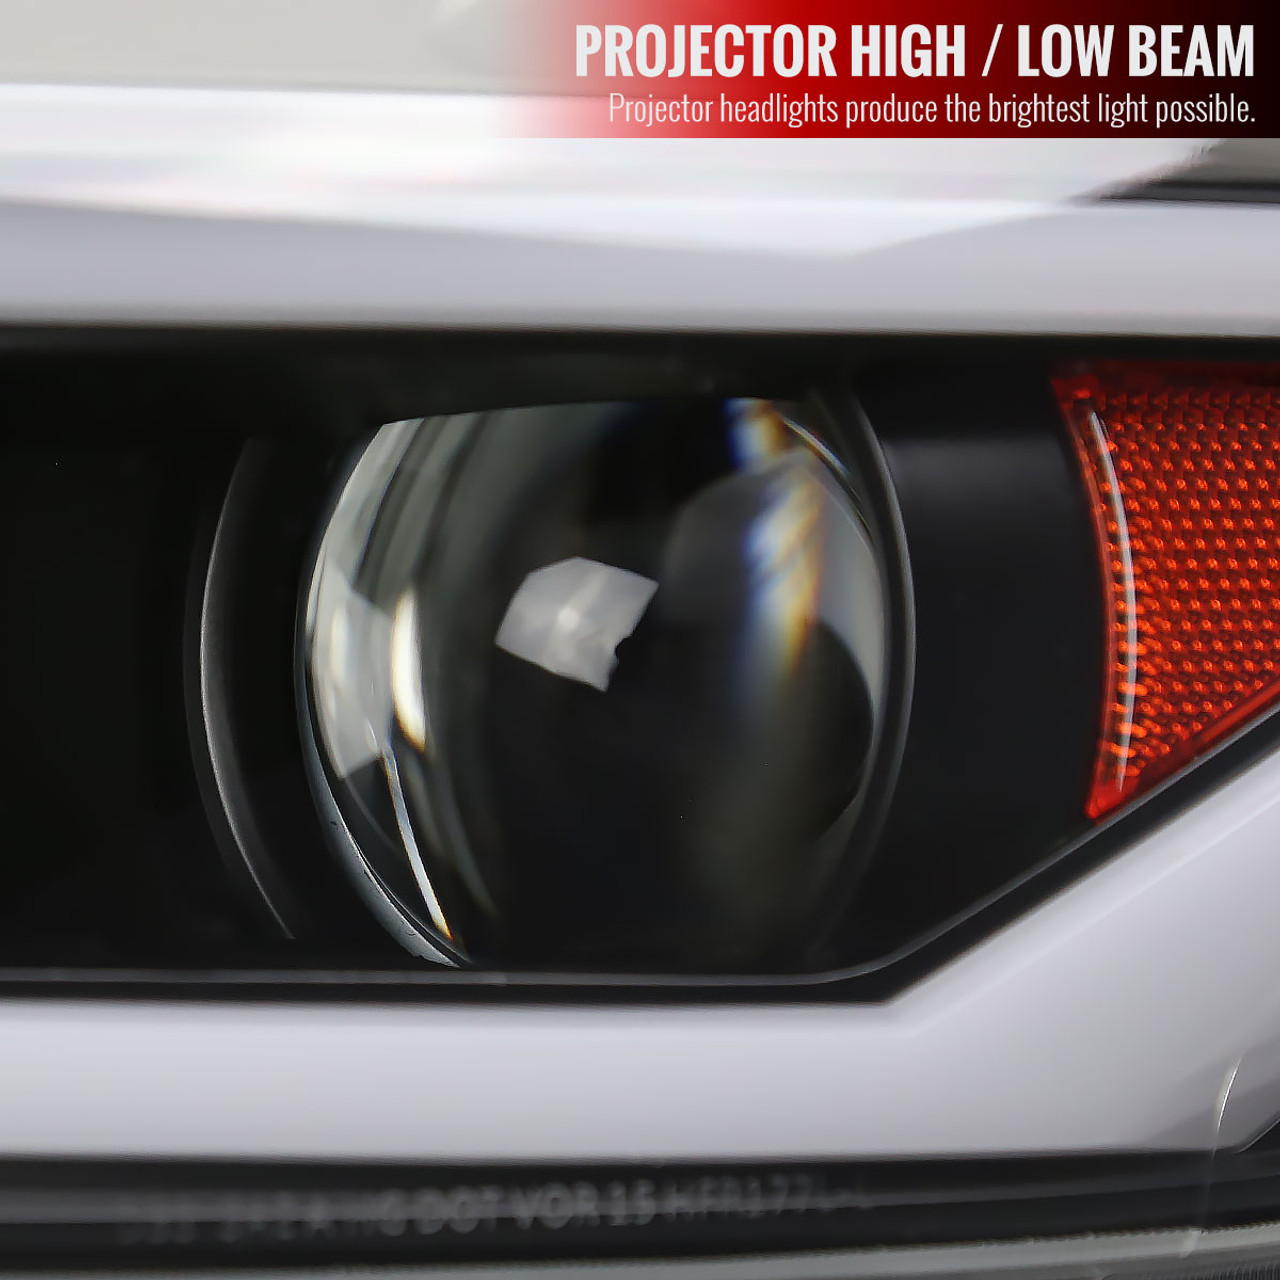 ➤ D3S Headlights with EU Approval - Set (MUSTANG 15-17 USA) now